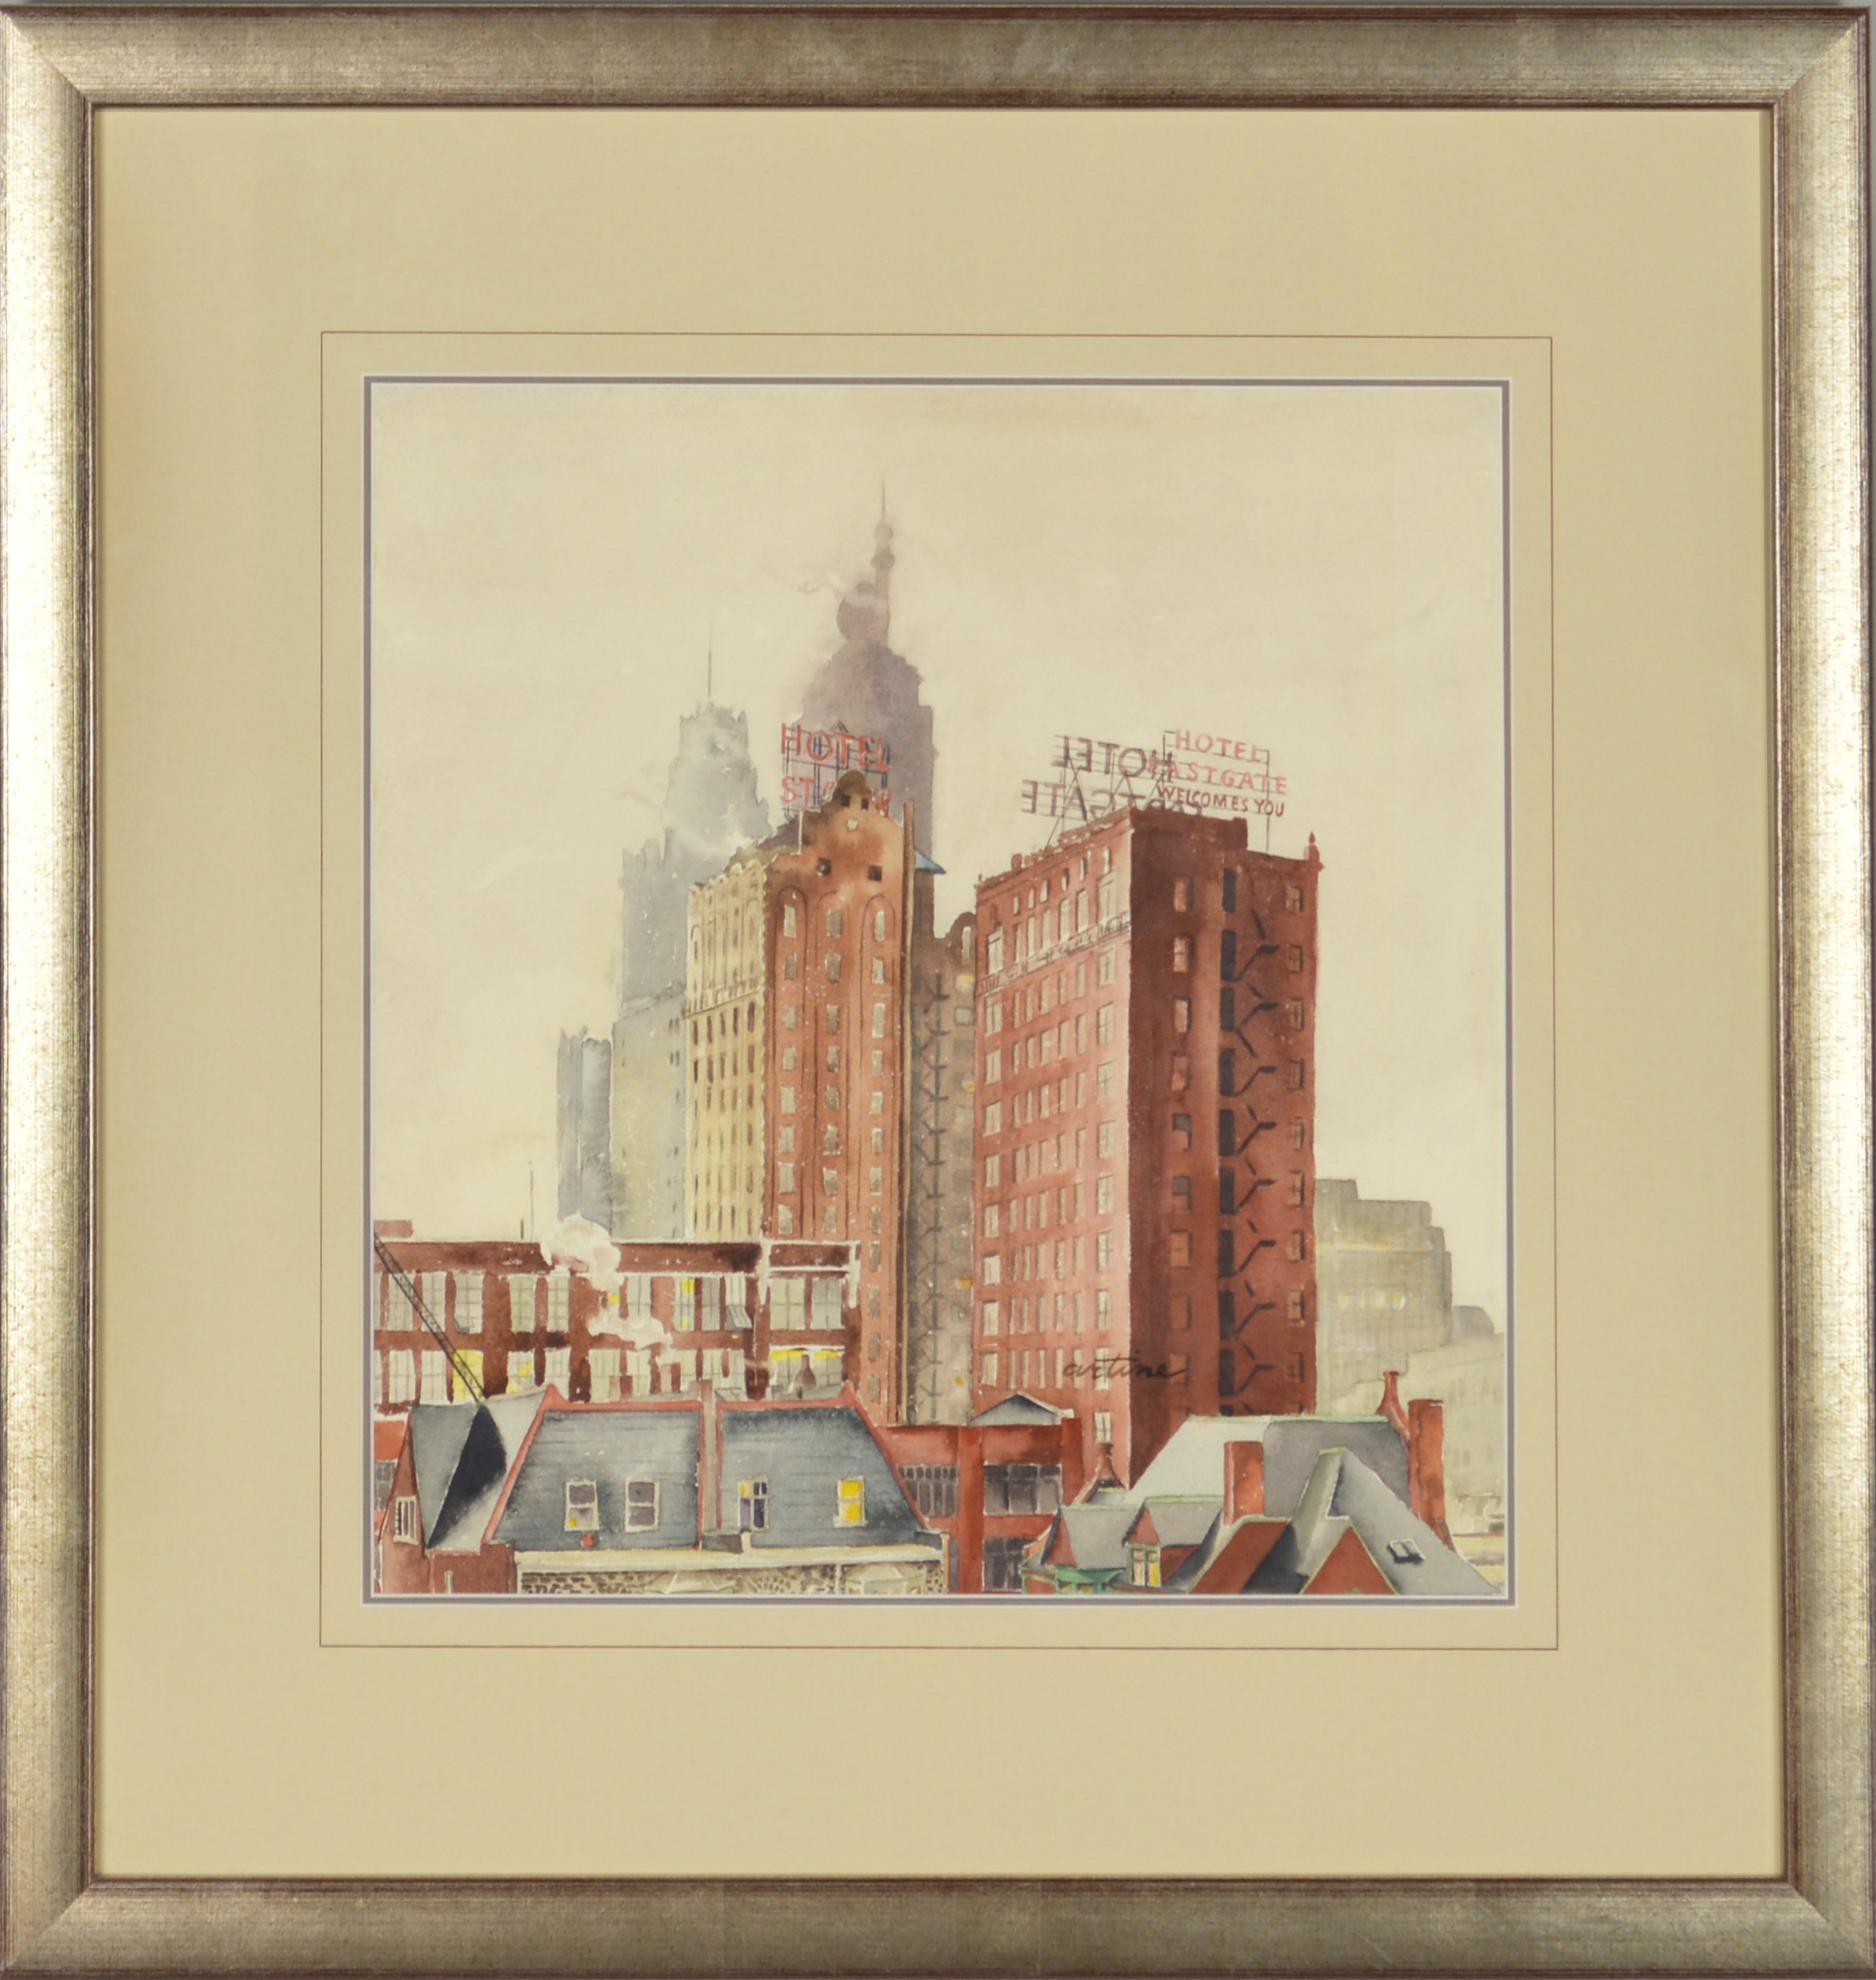  Robin Artine Smith,  Eastgate Hotel, Chicago , c. 1945, watercolor on paper, 15 x 14 1/4 in. 